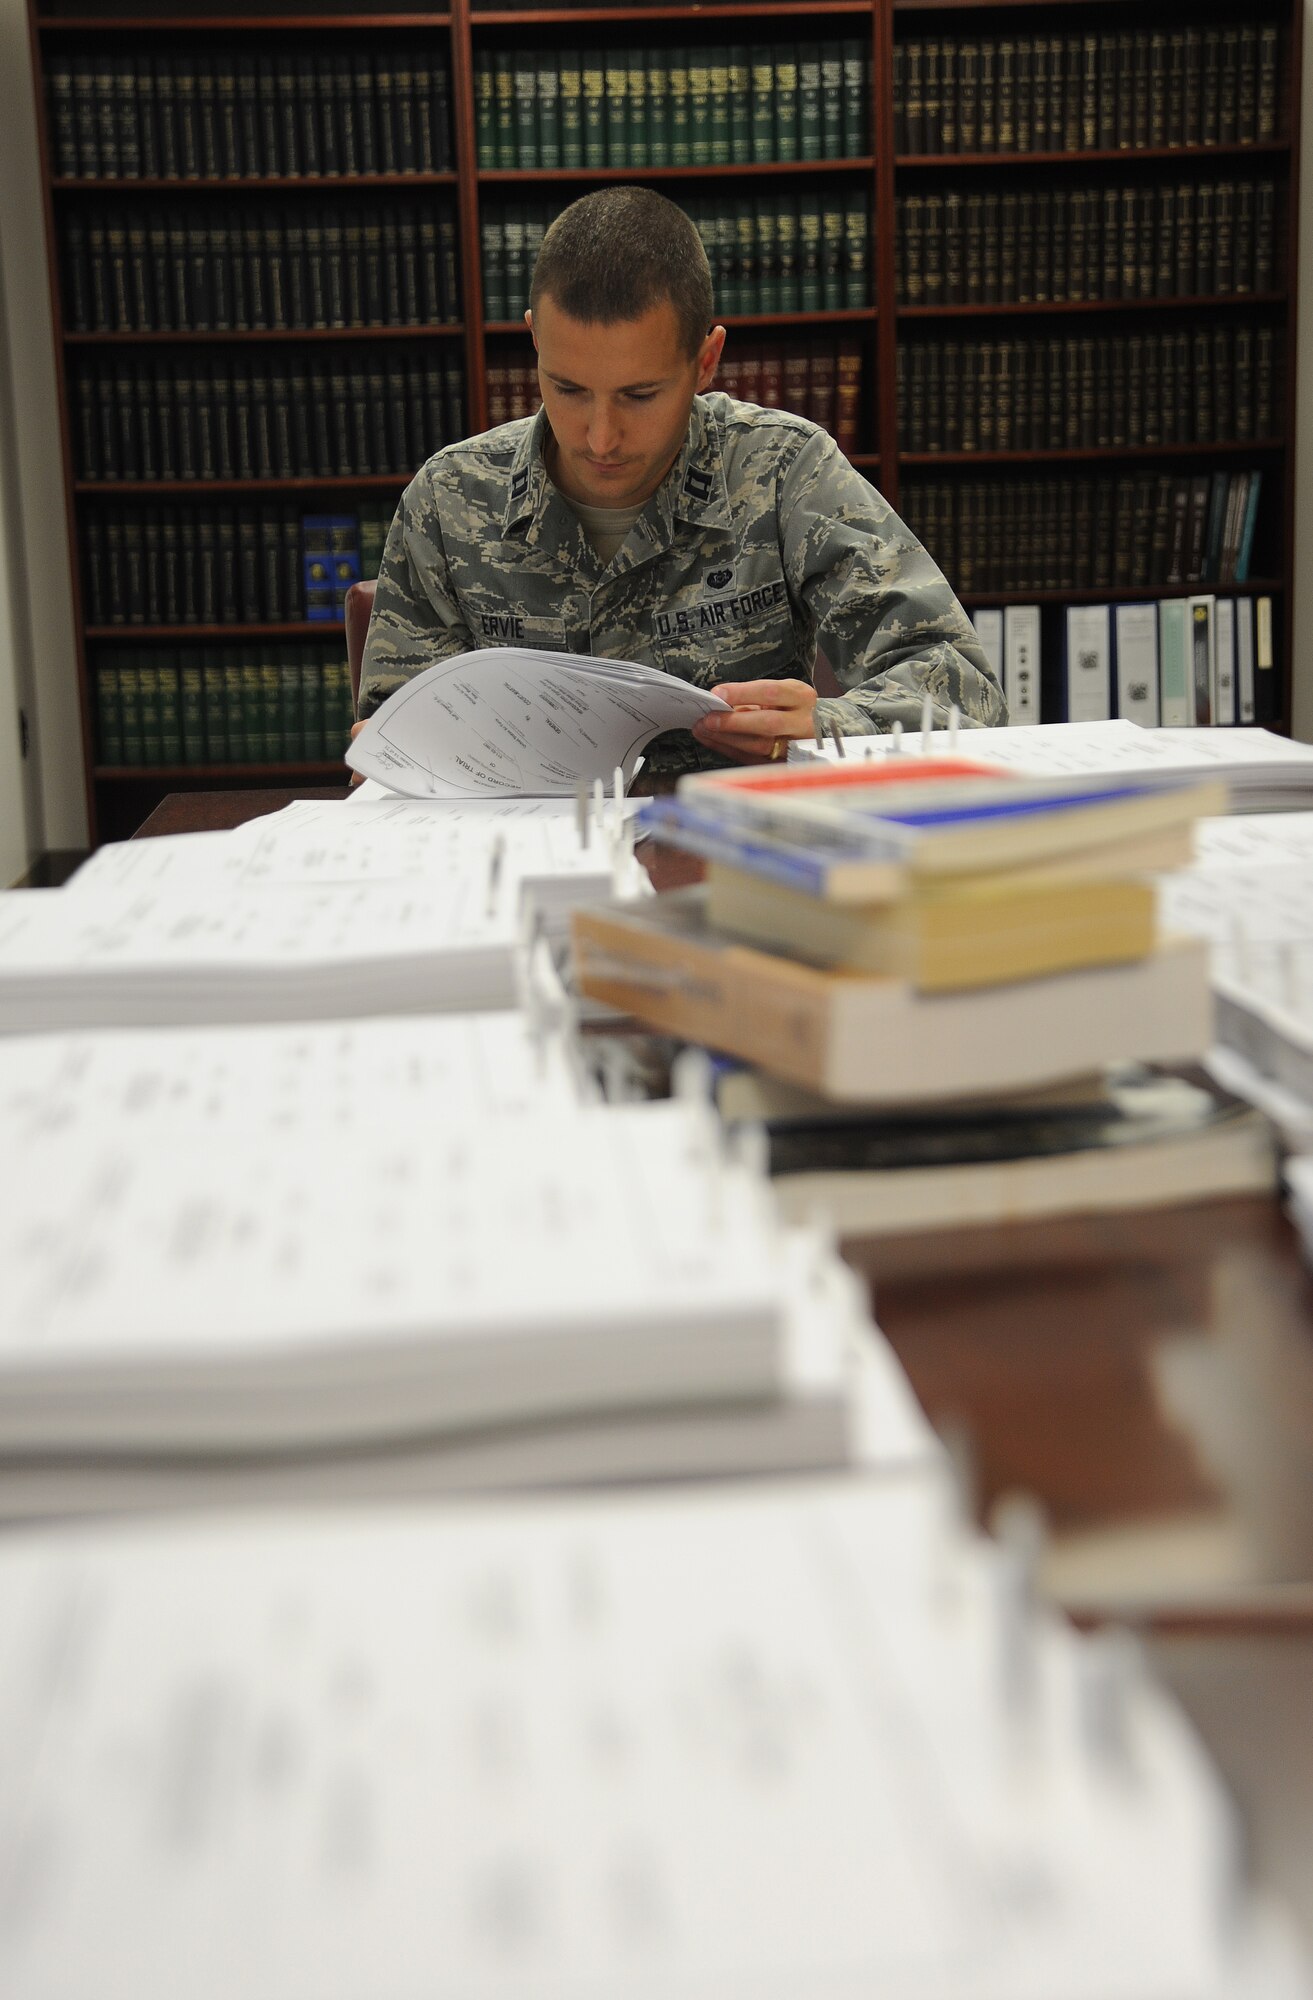 U.S. Air Force Capt. Phillip Ervie, 509th Bomb Wing Judge Advocate chief of adverse actions, reviews a record of trial from a recent court martial at Whiteman Air Force Base, Mo., Oct. 30, 2013. The legal issues military justice professionals encounter are wide-ranging, including criminal, government contract, labor, international, environmental and real property laws. (U.S. Air Force photo by Staff Sgt. Nick Wilson/Released)